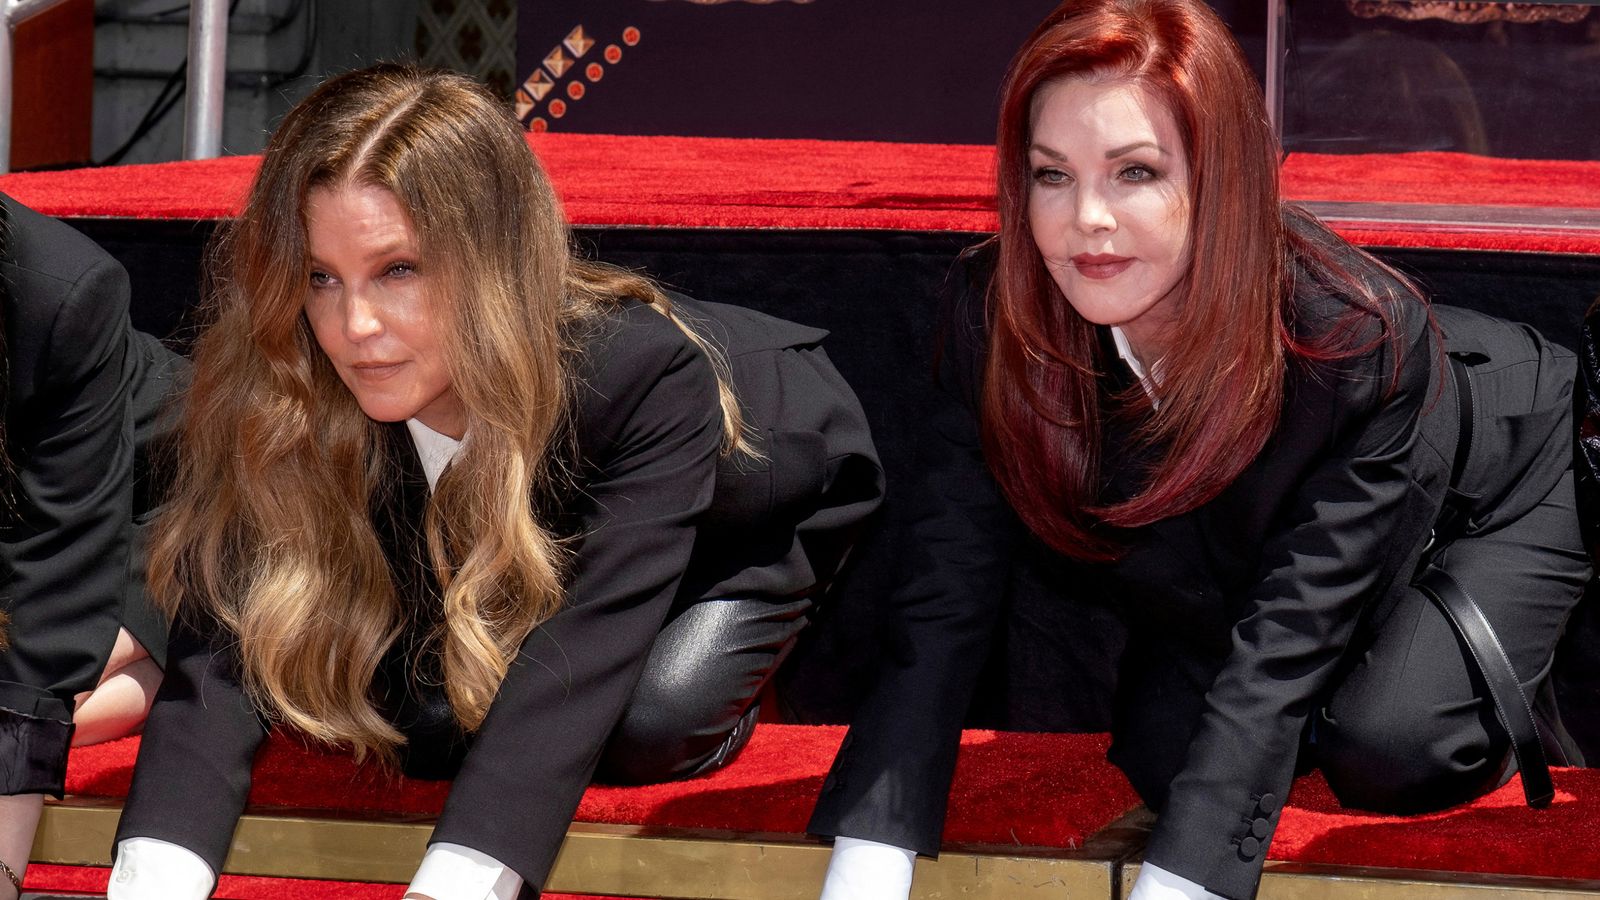 Priscilla Presley challenges 'validity' of daughter Lisa Marie's will